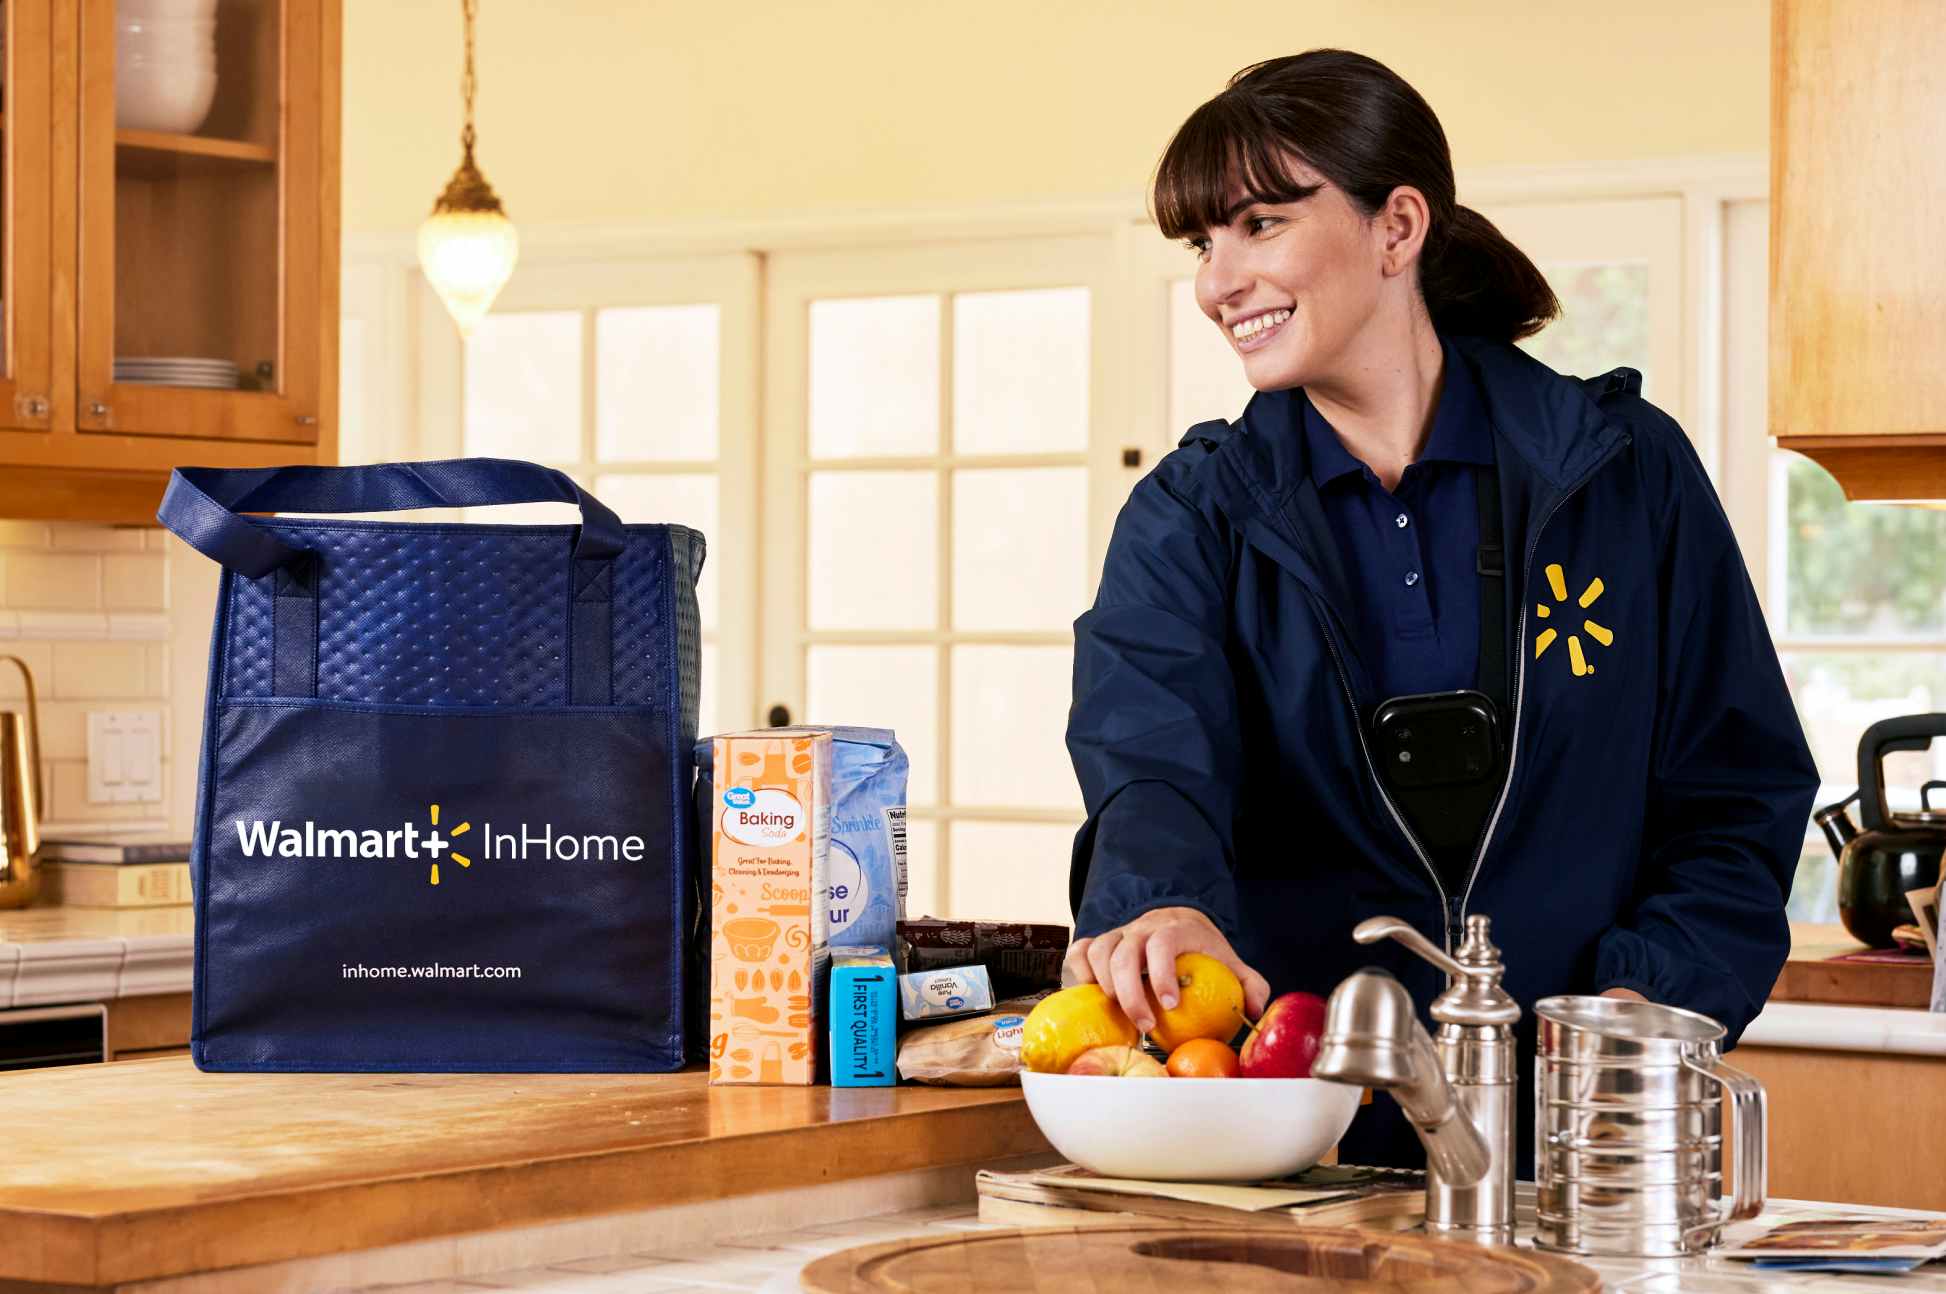 walmart employee delivering fruit and baking goods into home with walmart inhome